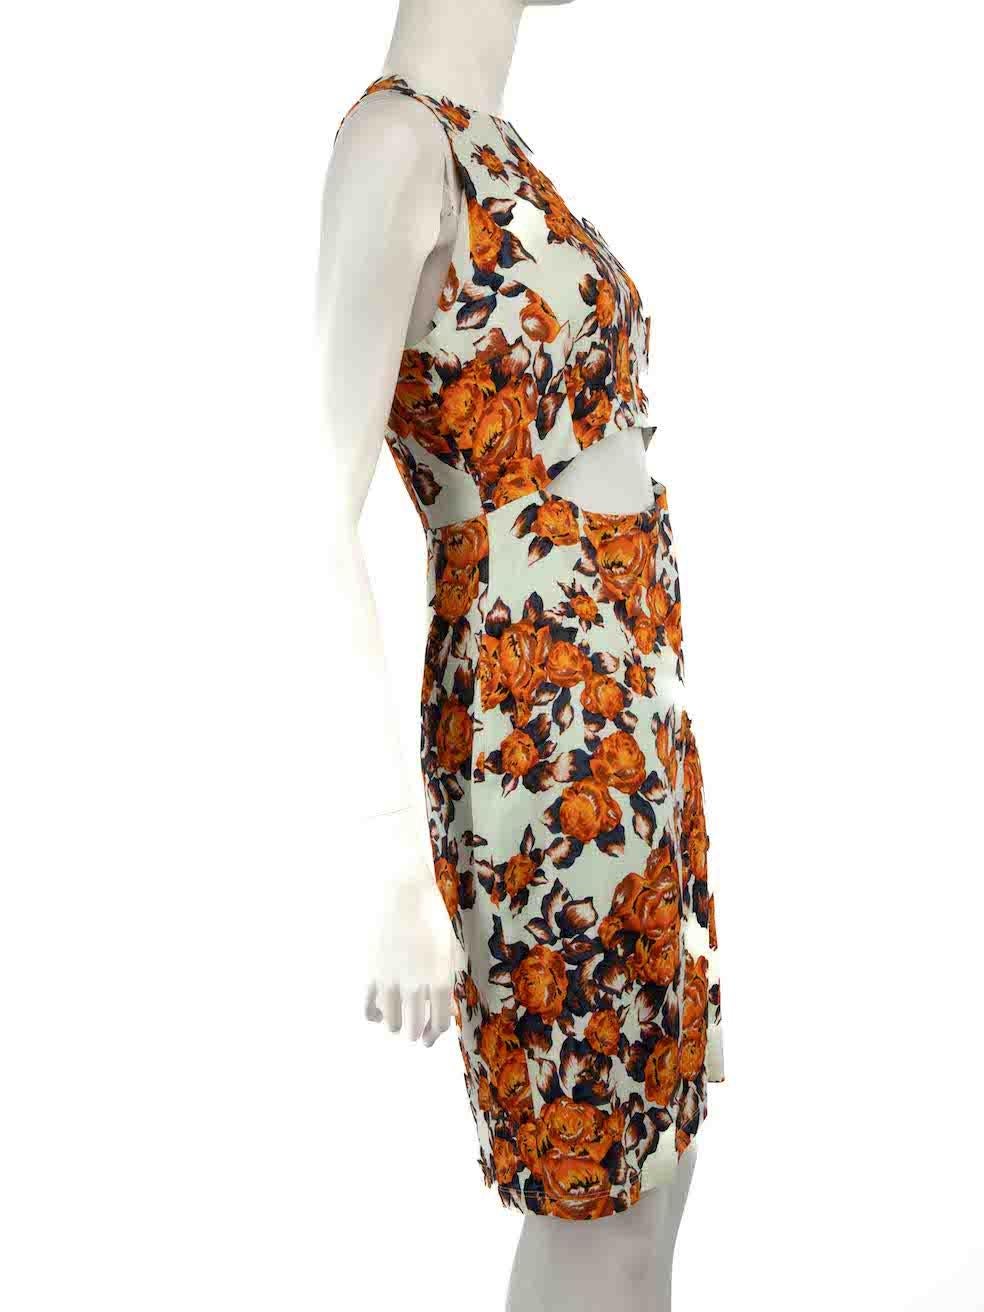 CONDITION is Very good. Minimal wear to dress is evident. Minimal wear to the fabric composition with a handful of plucks and pulls to the weave found through the back of this used Suno designer resale item.
 
 Details
 Orange
 Silk
 Dress
 Floral